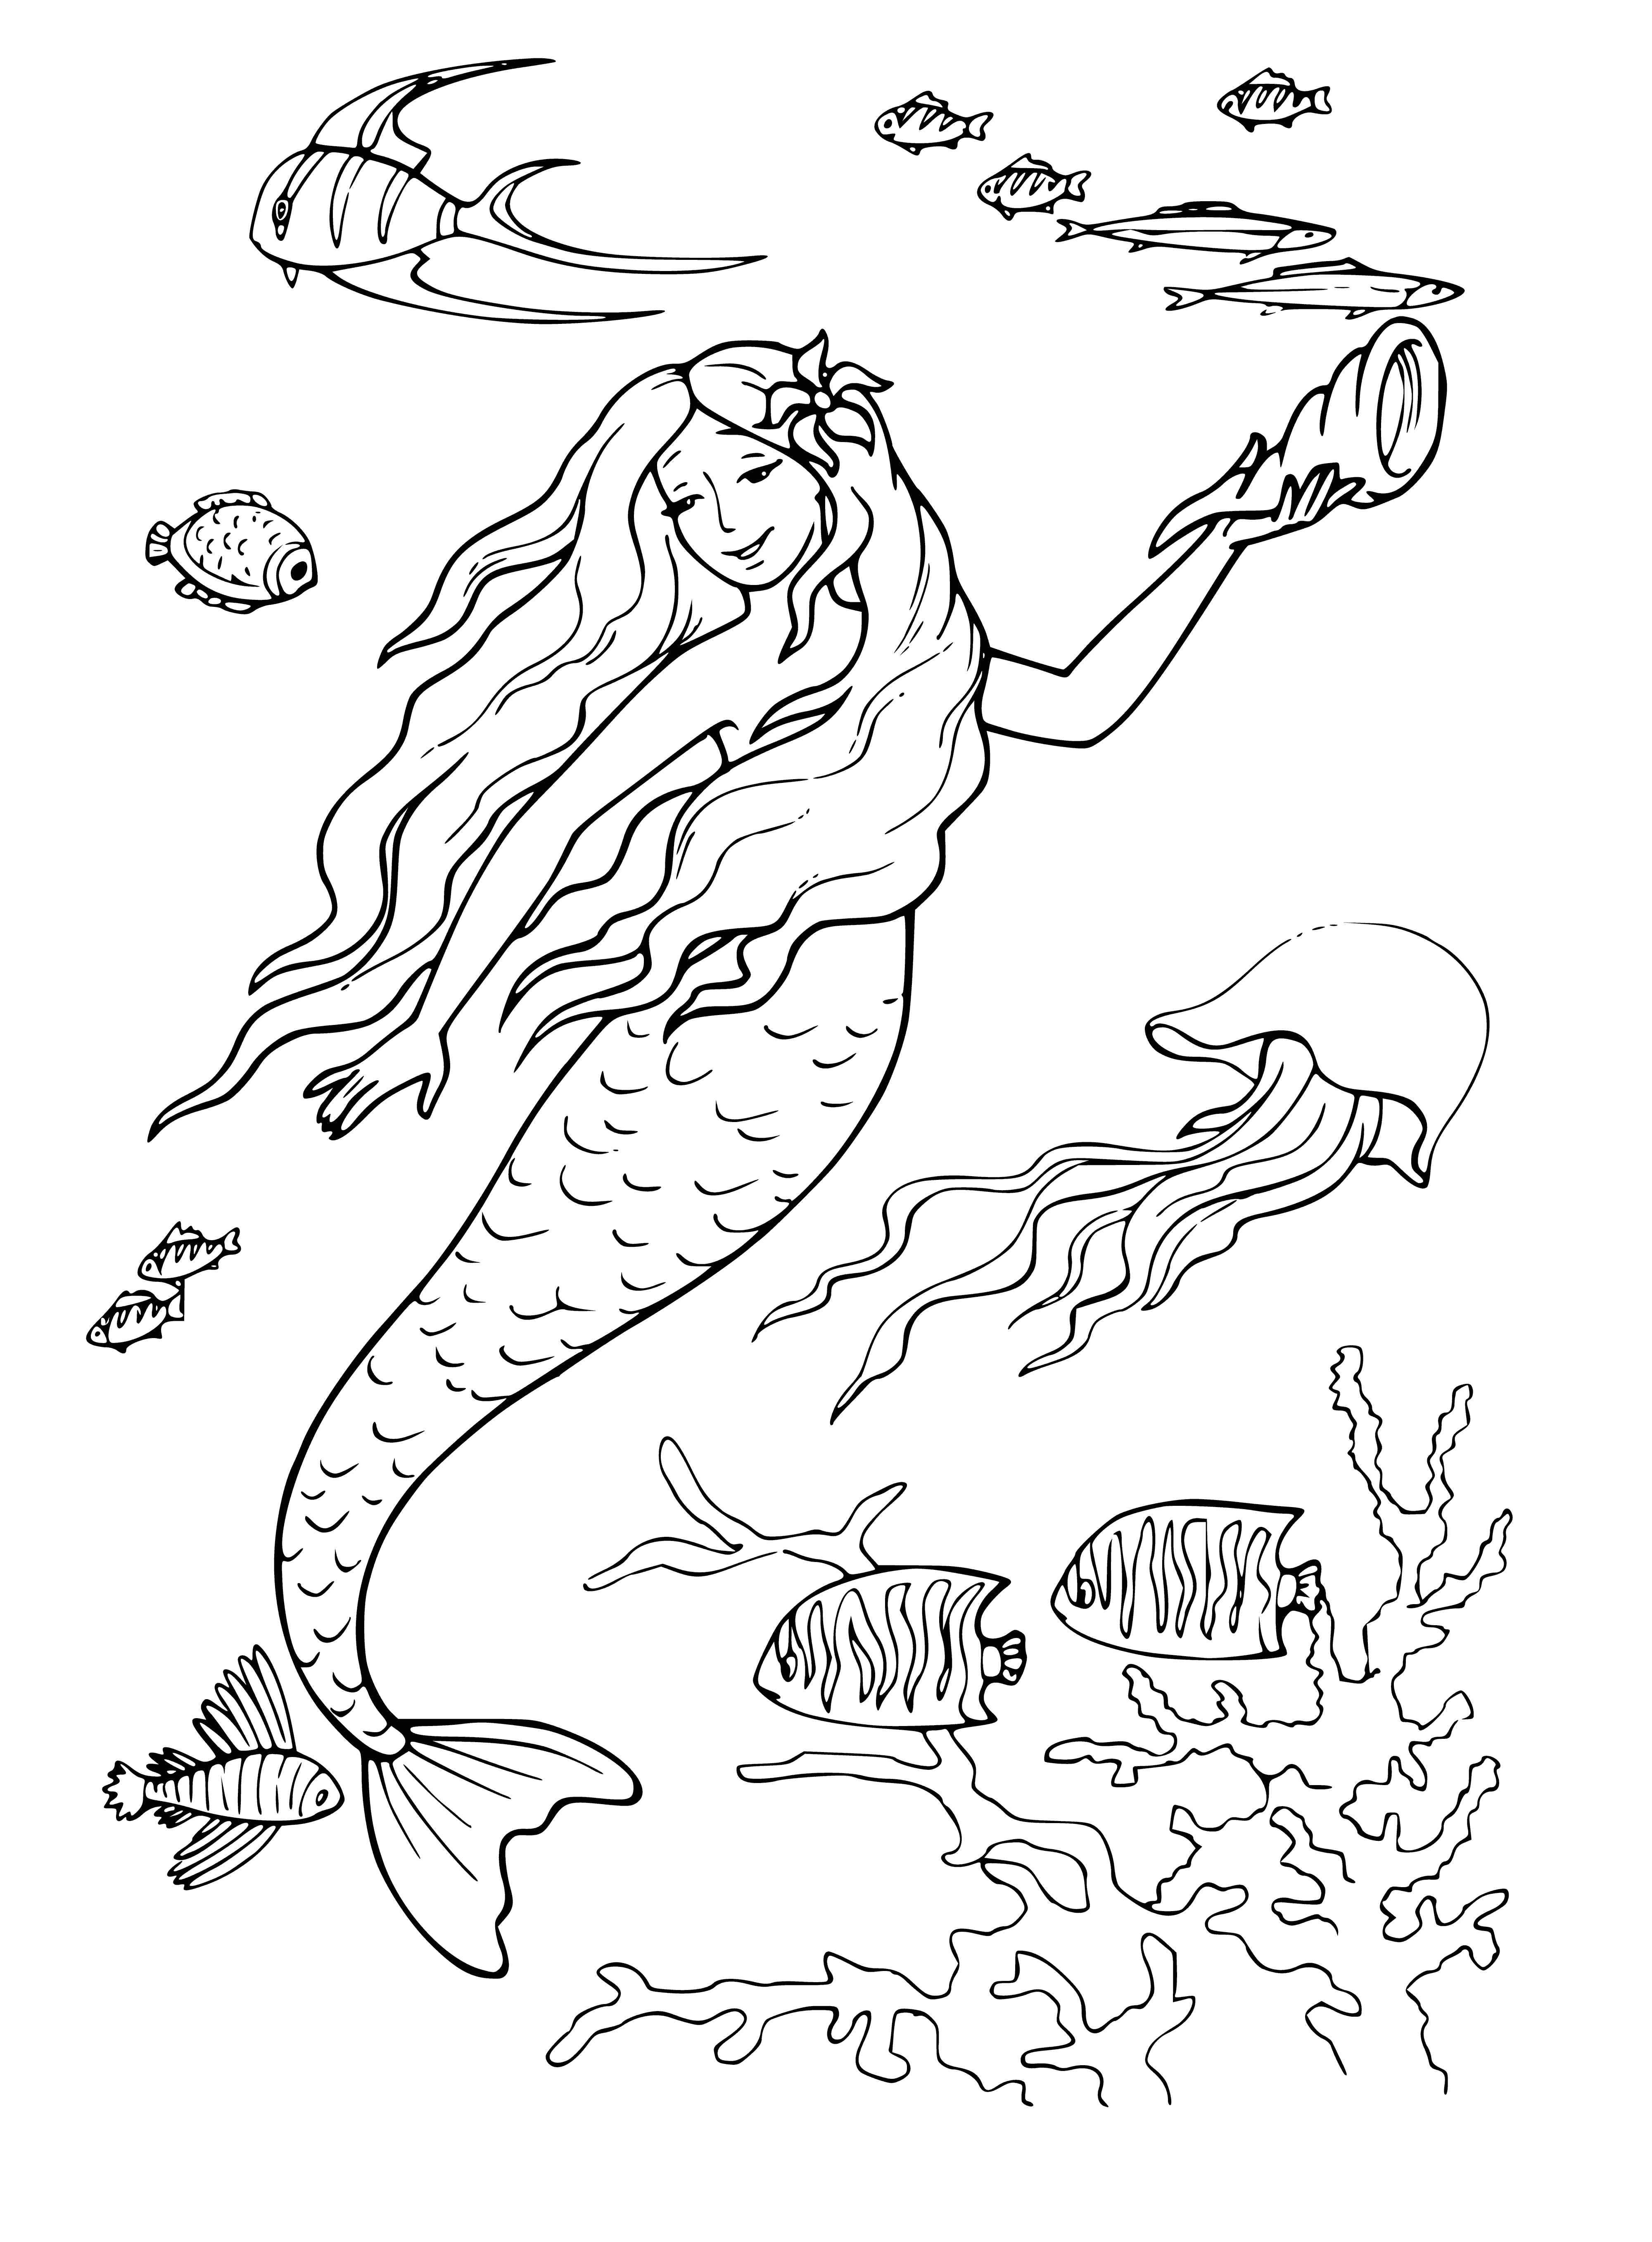 coloring page: Mermaid swims happily in coral reef - long blonde hair, beautiful tail - content in her underwater world.